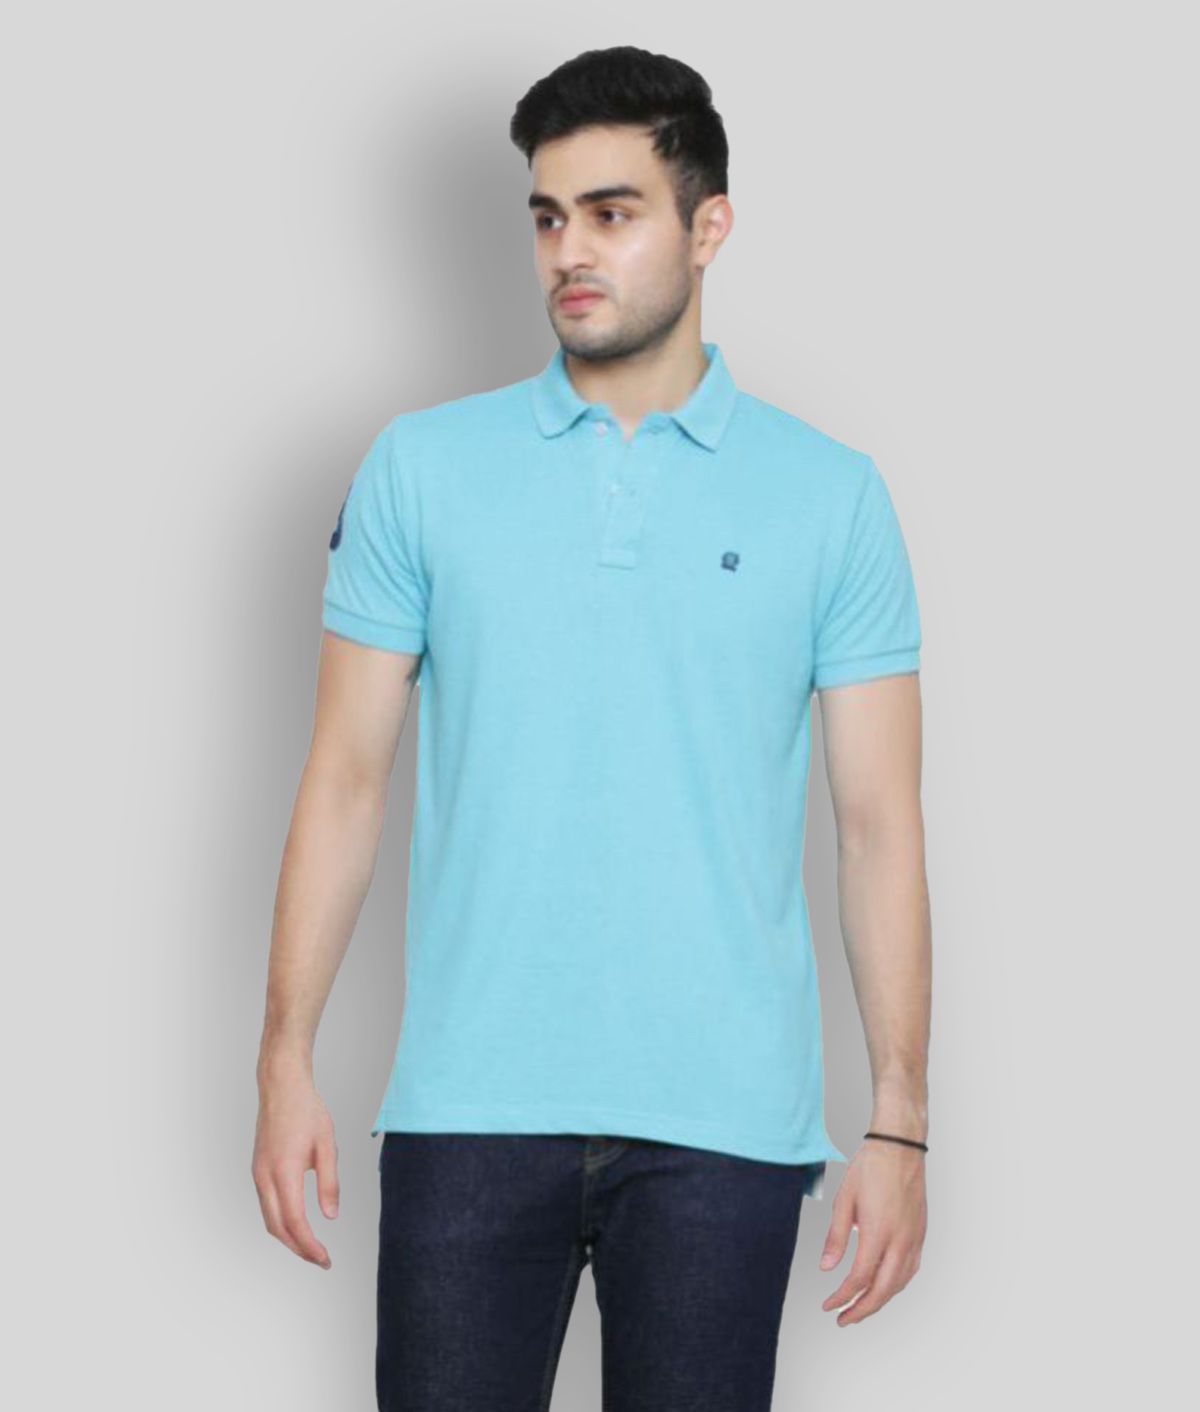     			GENTINO - Turquoise Cotton Blend Regular Fit Men's Polo T Shirt ( Pack of 1 )